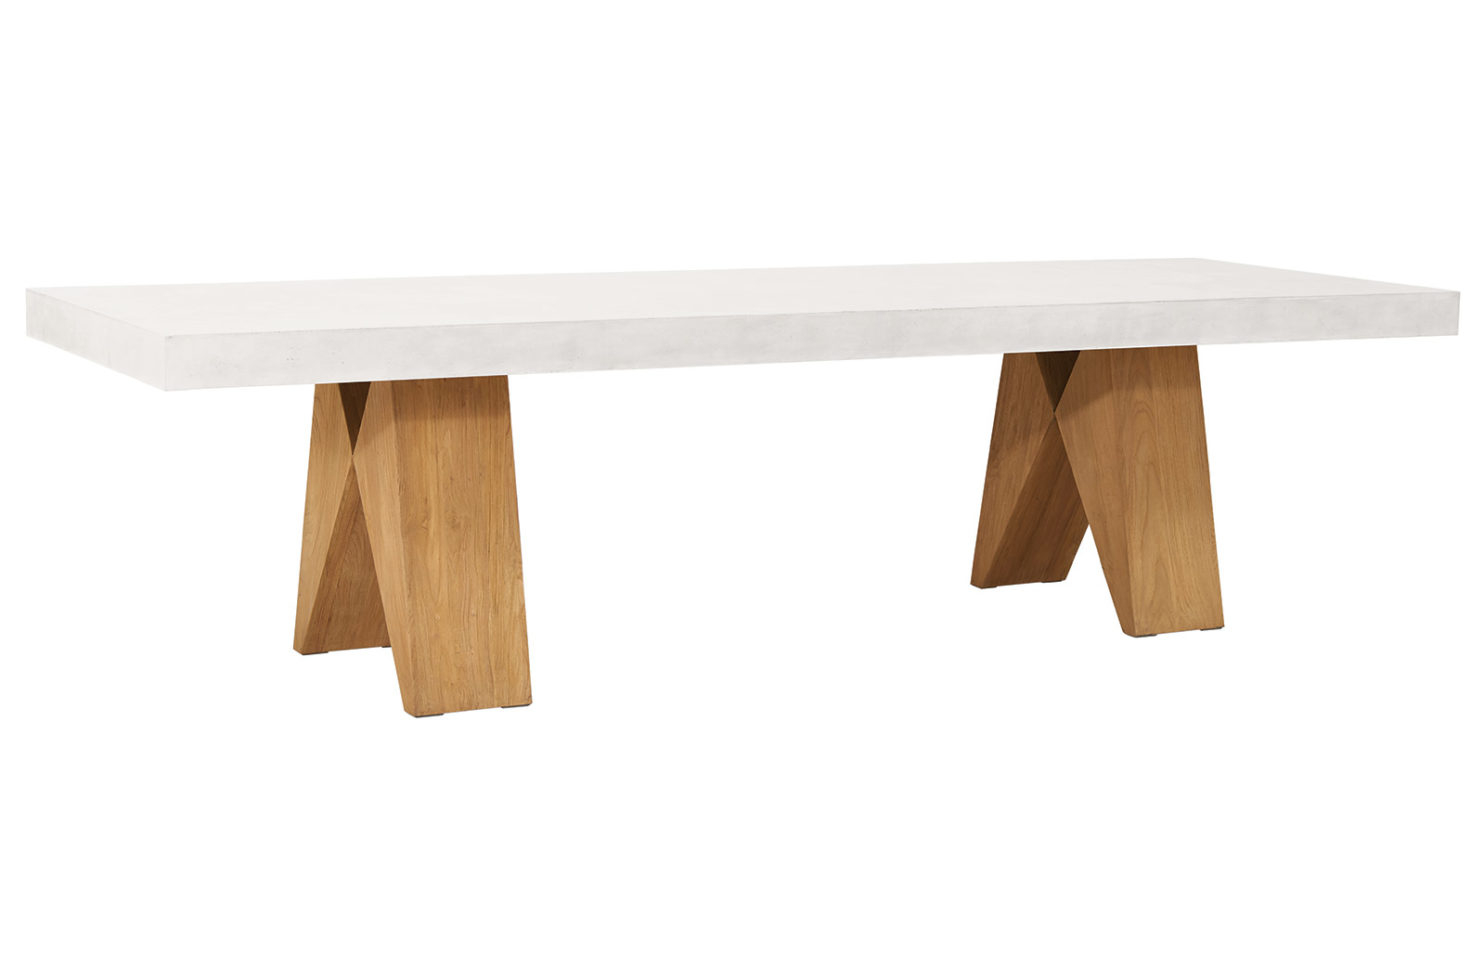 Seasonal Living Perpetual Concrete and Teak Clip Dining Table 118- Ivory White